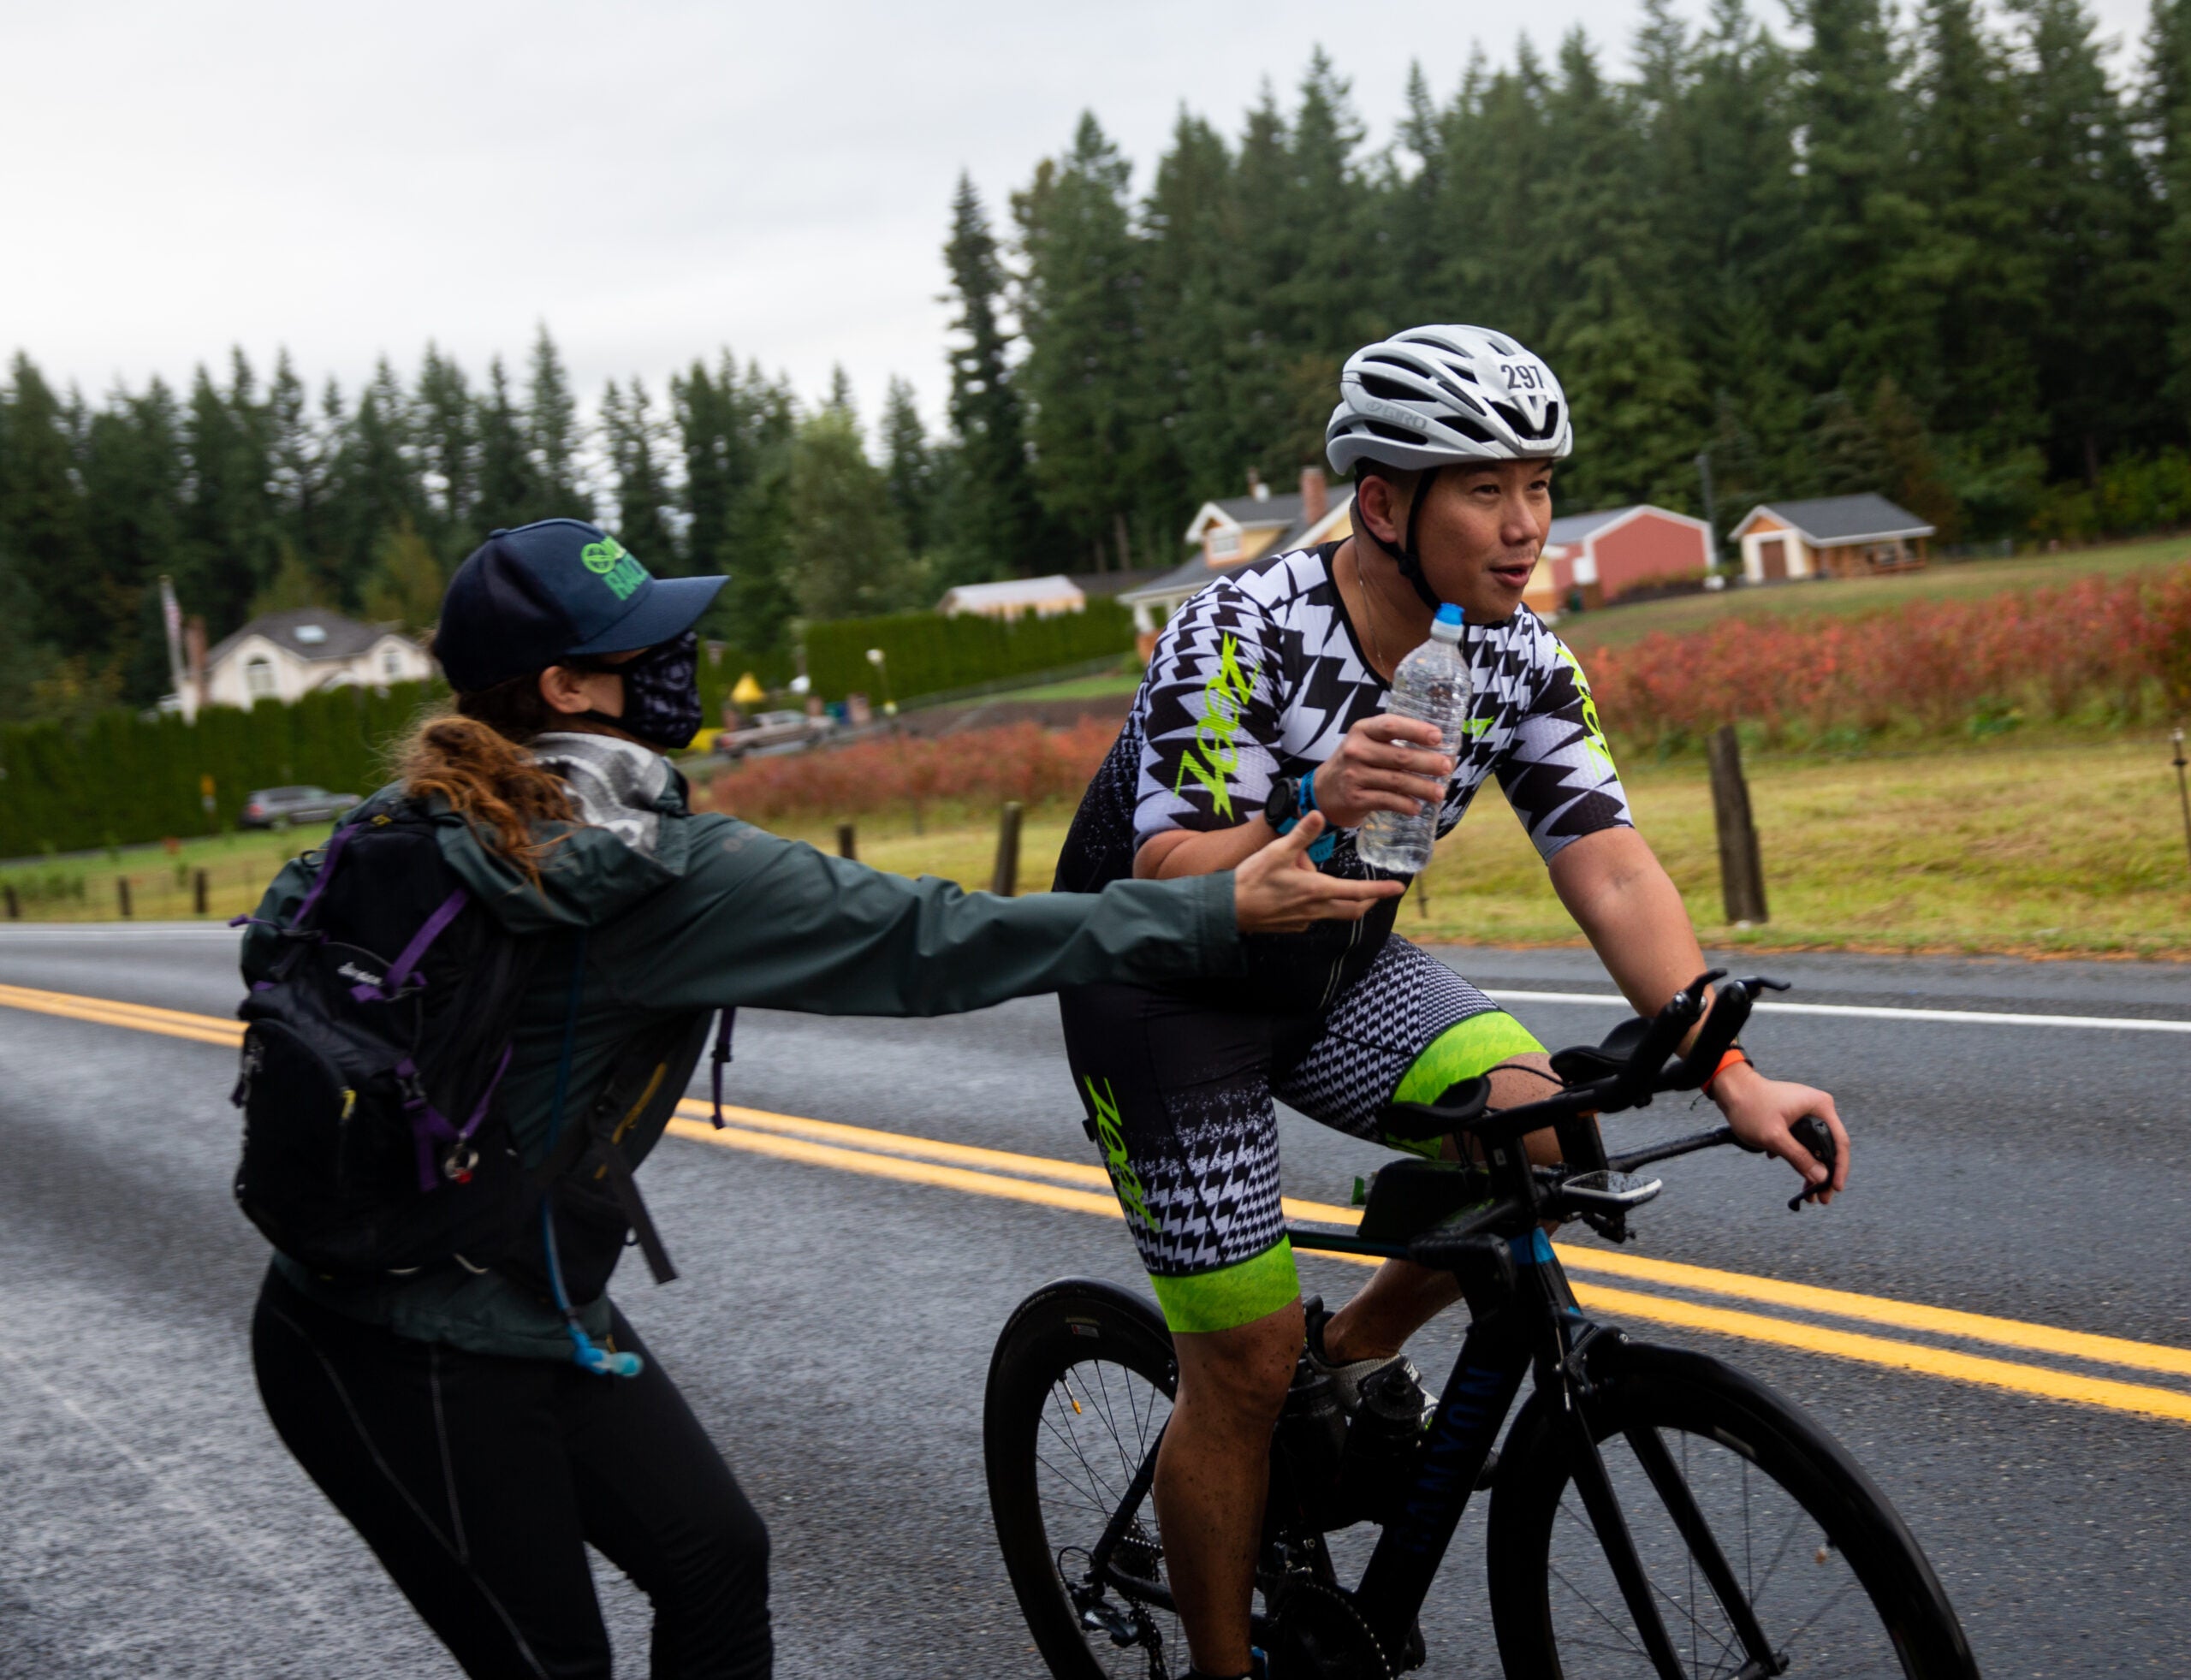 An athlete takes a water bottle on the bike. Hydration is a critical part of a 70.3 nutrition plan.